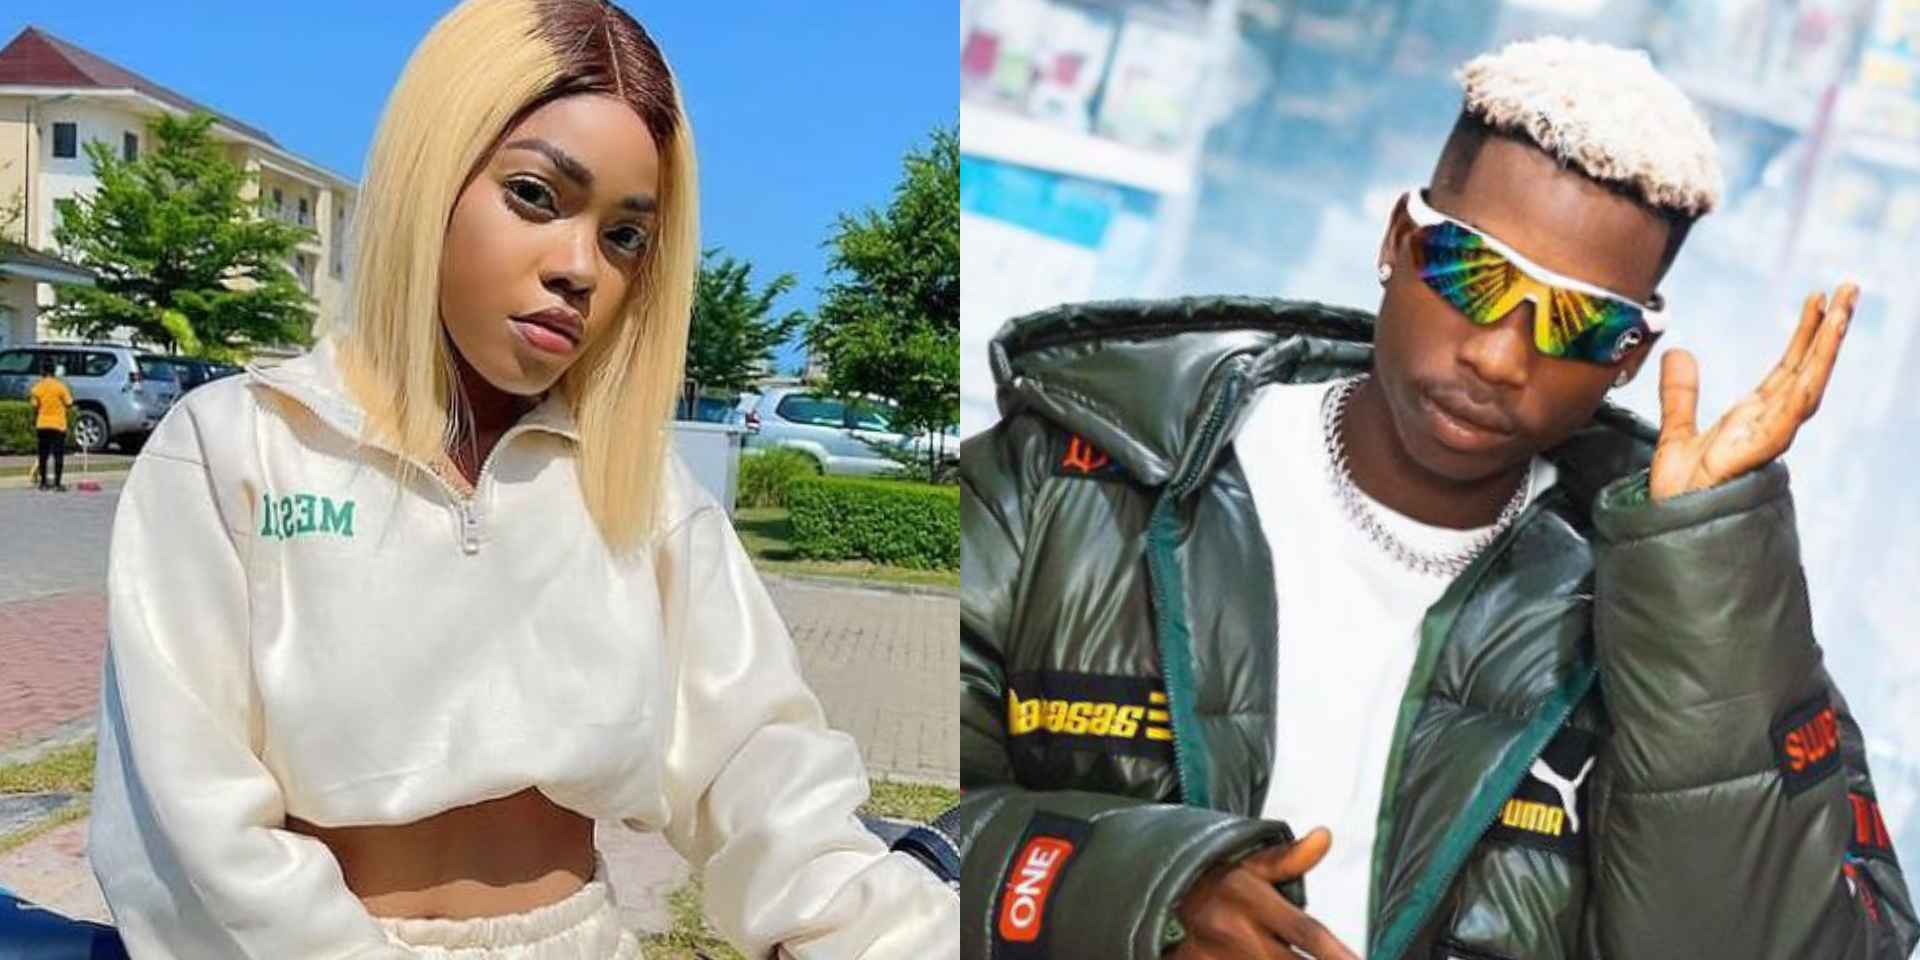 “We are not back together” – Cute Geminme clears the air amid news alleging she went back to Lhil Frosh [Video]